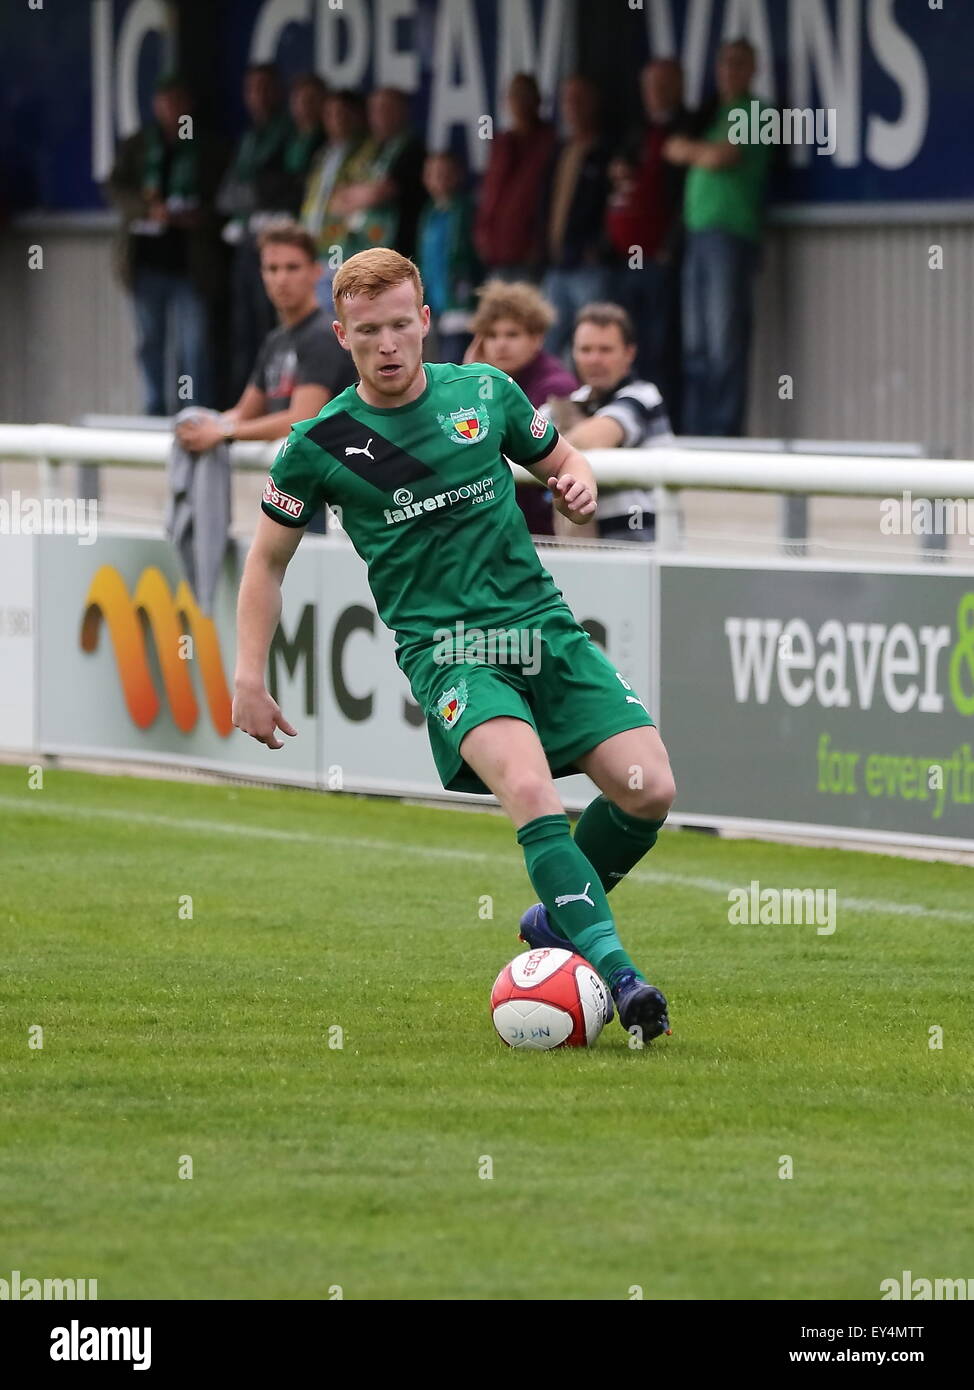 Nantwich, Cheshire, UK. 21st July, 2015. Nantwich Town entertain League Two Morecambe in a pre season friendly at The Weaver Stadium. Morecambe ran out 6-0 victors. Nantwich Town's Chris Smith on the ball. Credit:  SJN/Alamy Live News Stock Photo